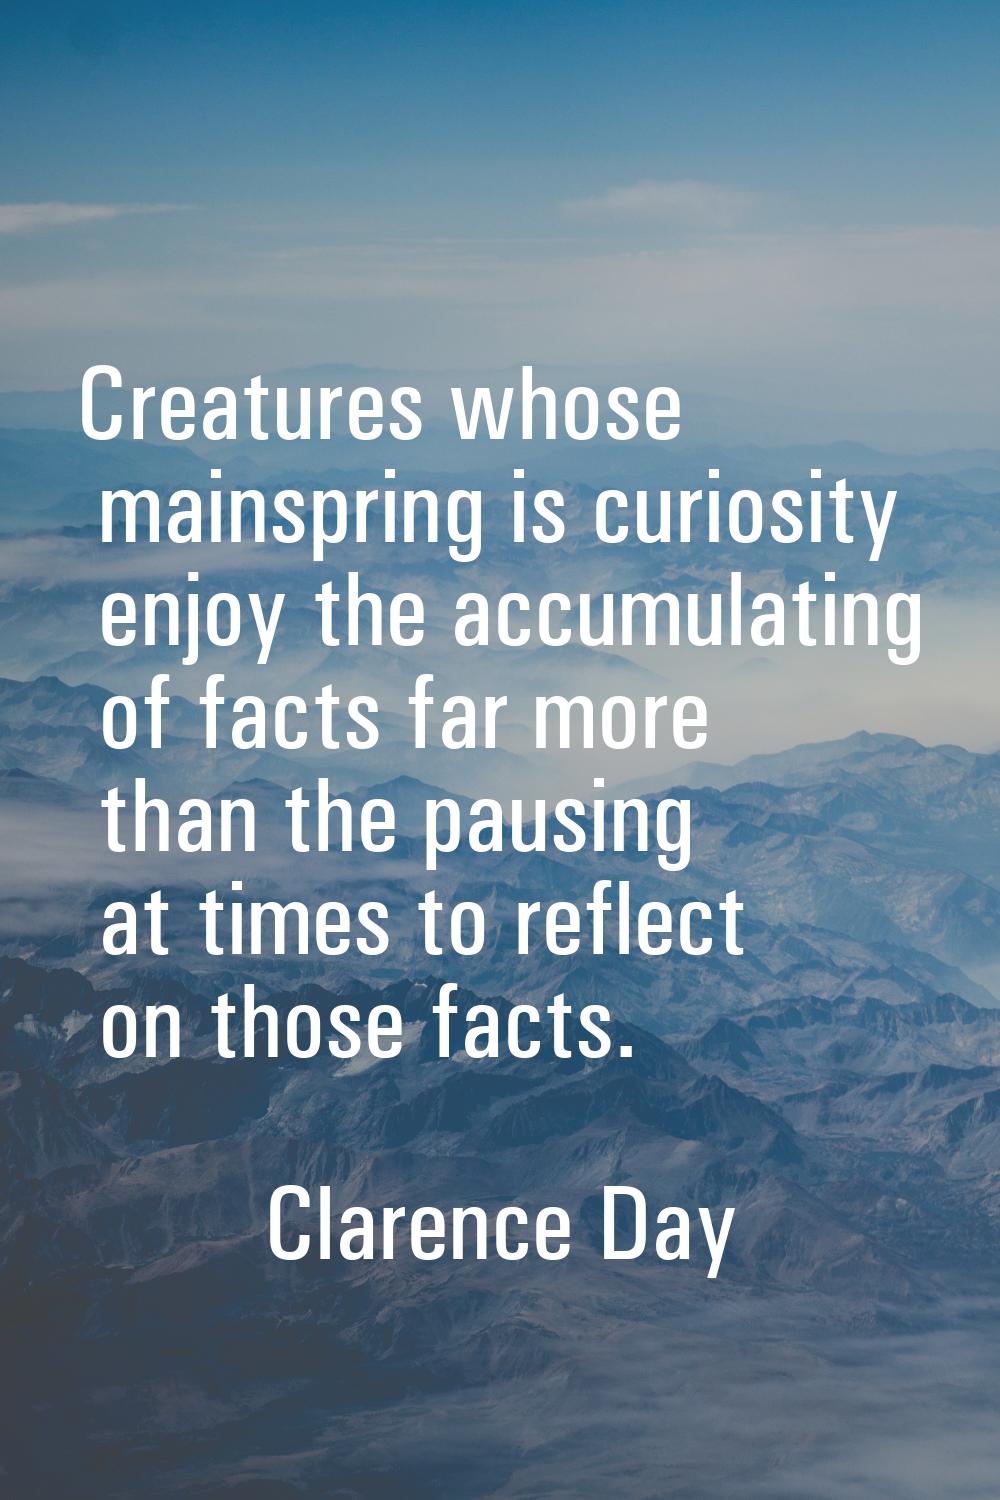 Creatures whose mainspring is curiosity enjoy the accumulating of facts far more than the pausing a